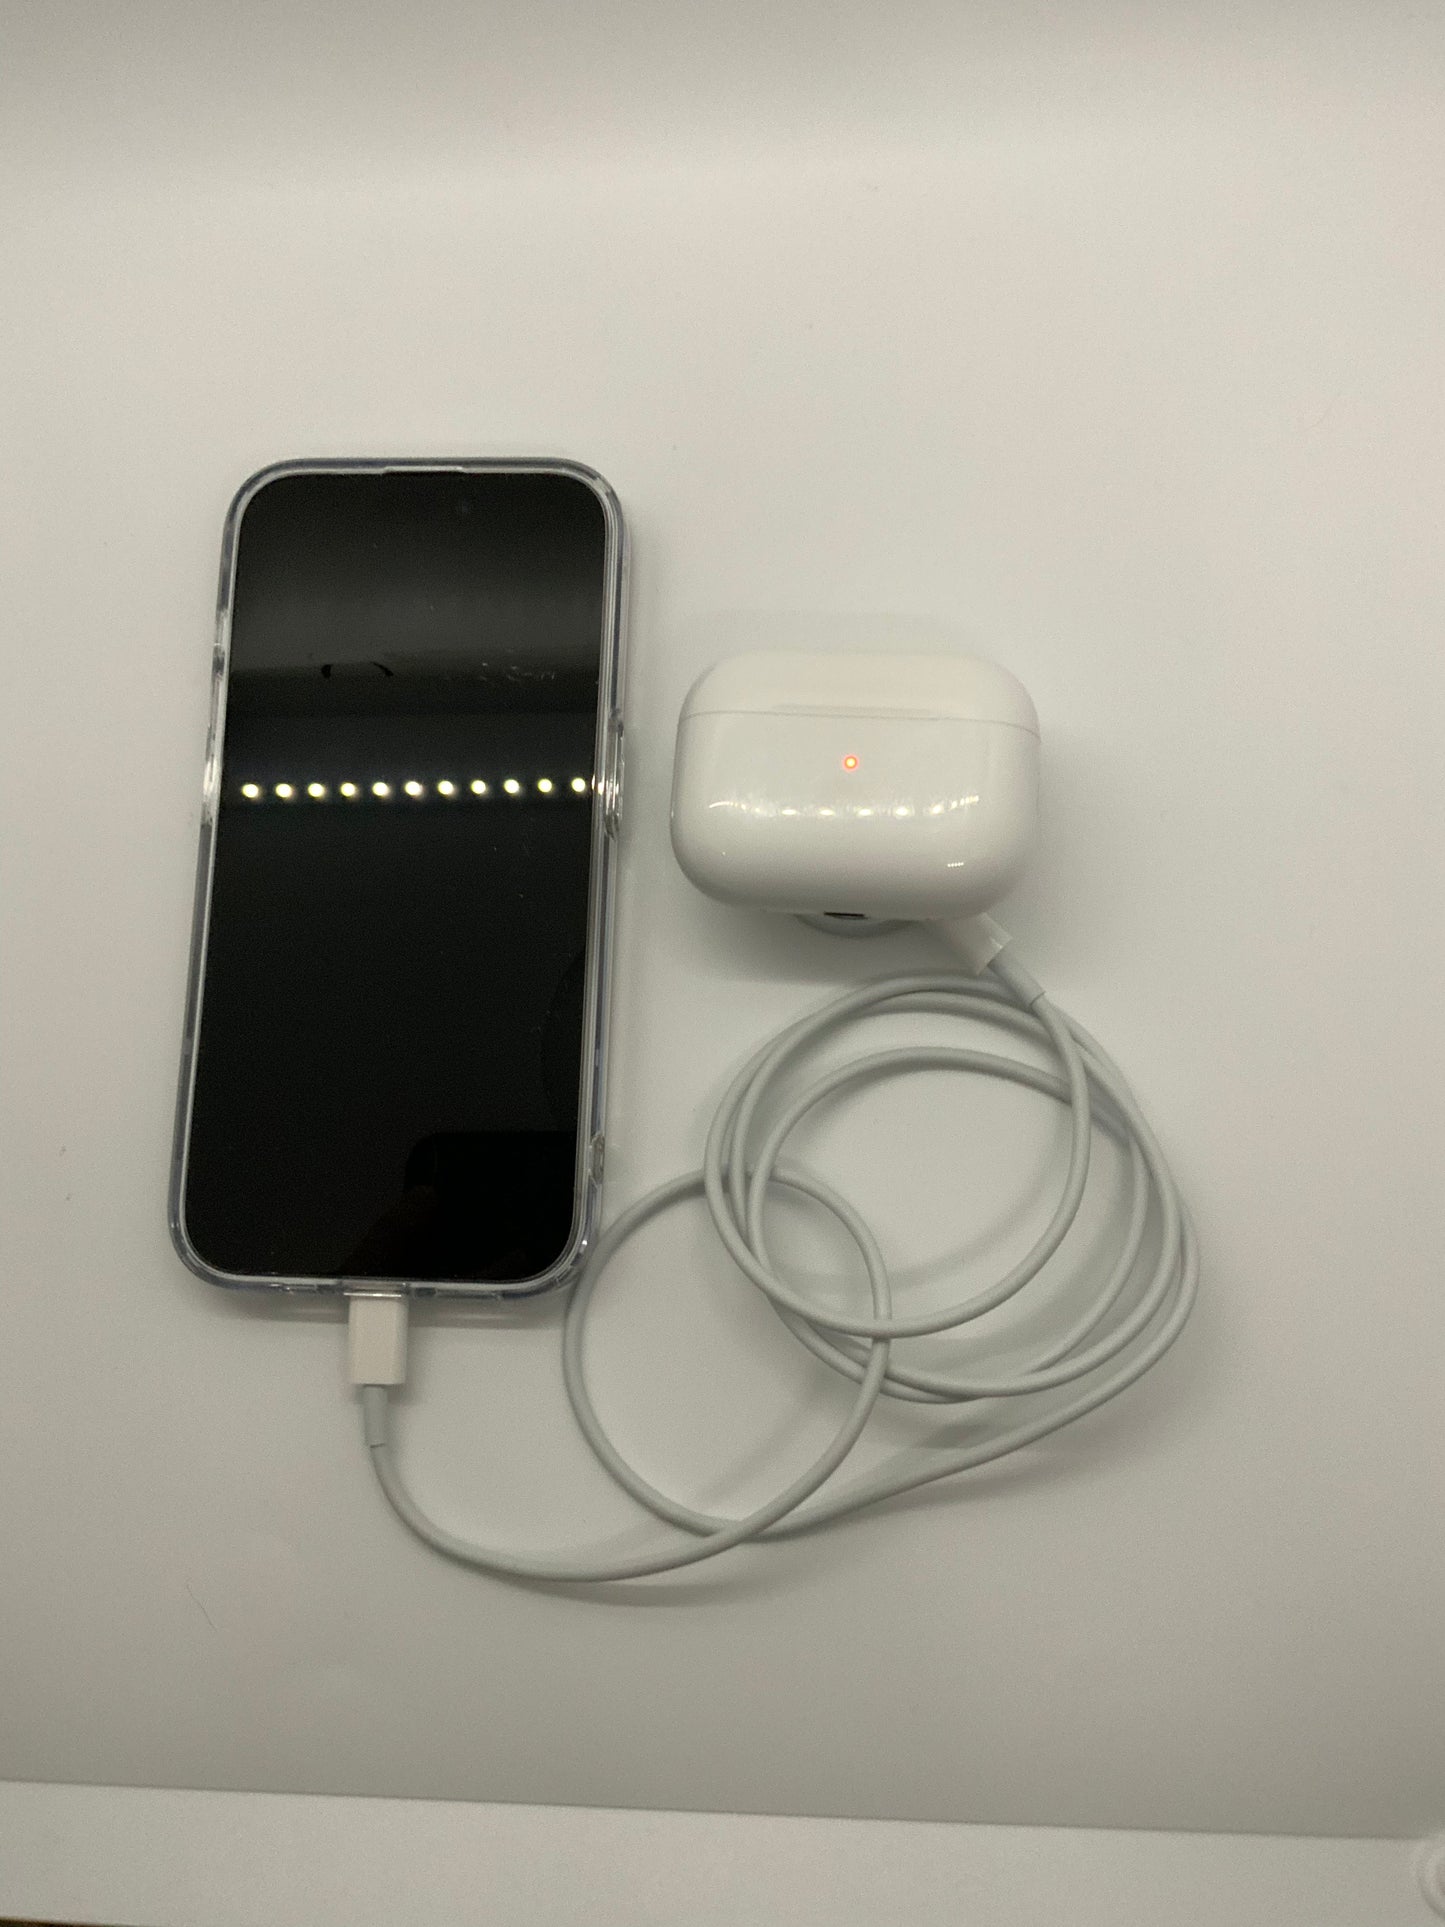 The picture shows a smartphone with a white charging cable plugged into it. Next to the smartphone, there is a white case for wireless earbuds with a small red light on it. The case also has a charging cable attached to it. Both the smartphone and the earbud case are placed on a white surface.